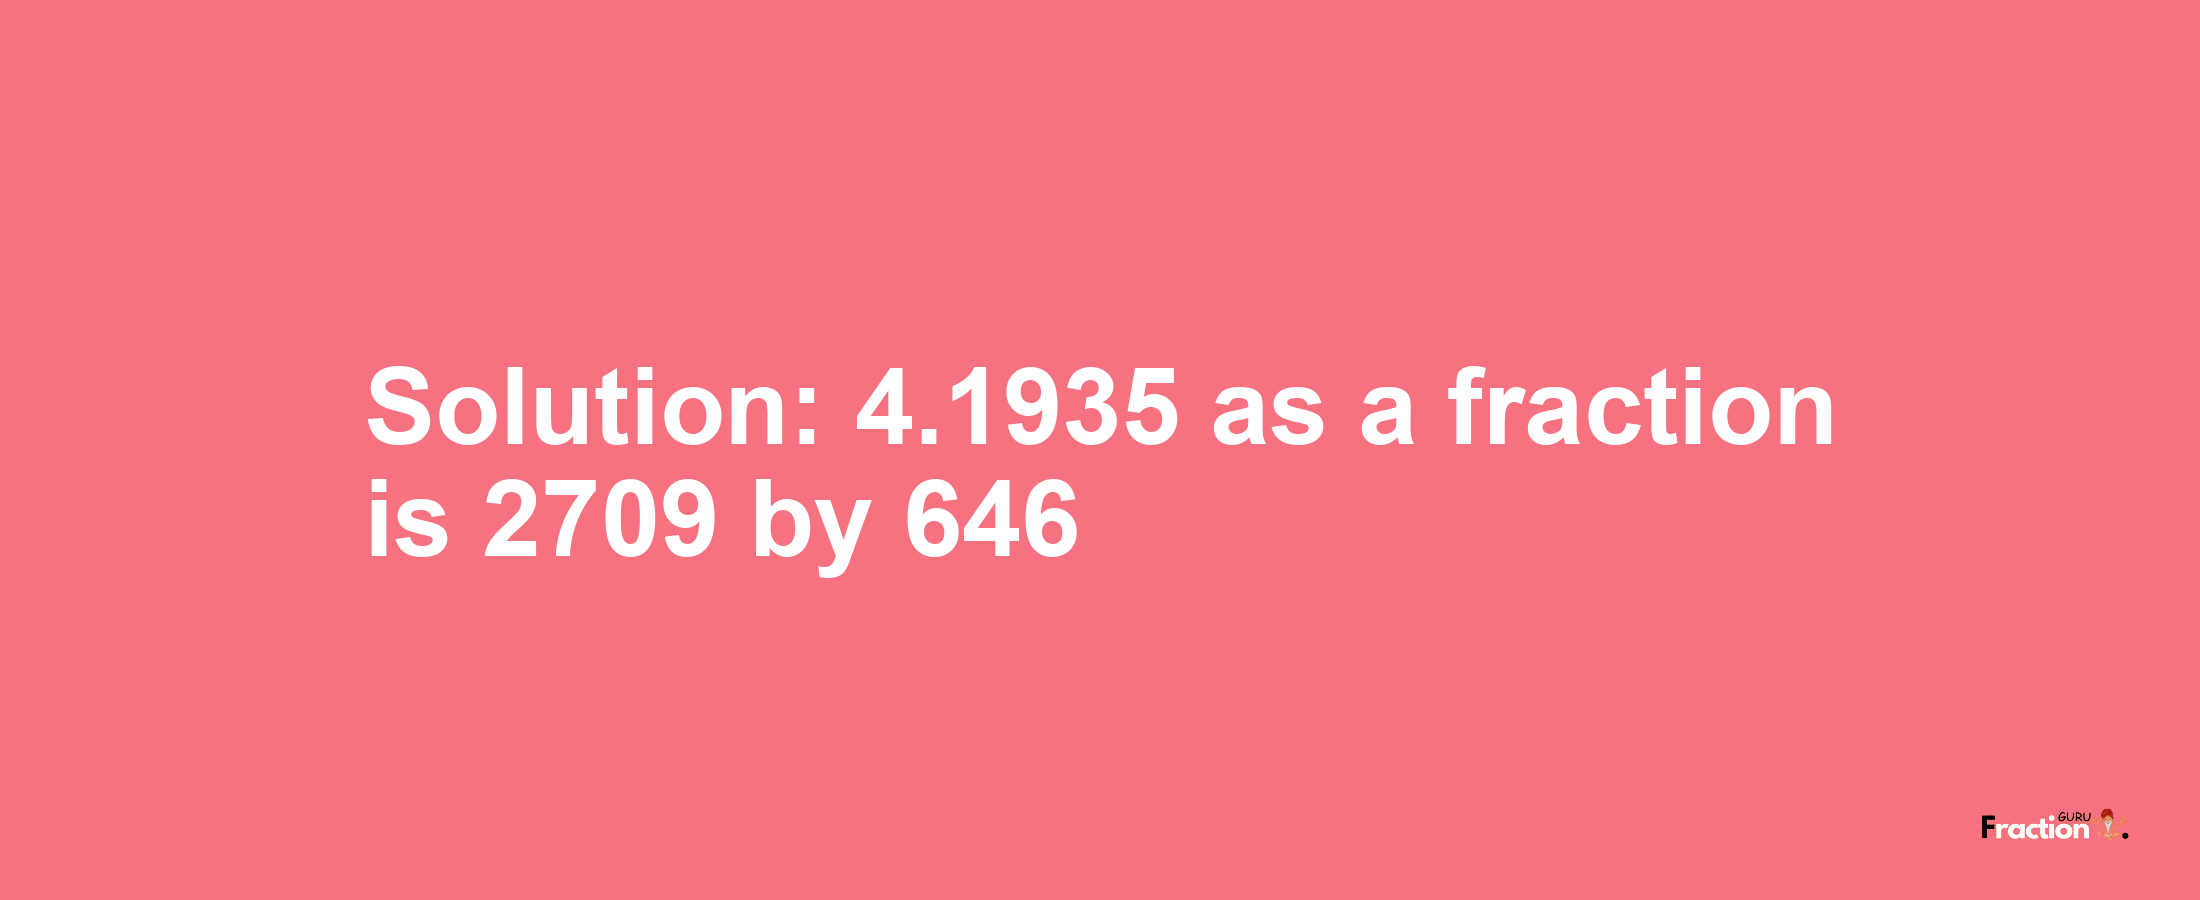 Solution:4.1935 as a fraction is 2709/646